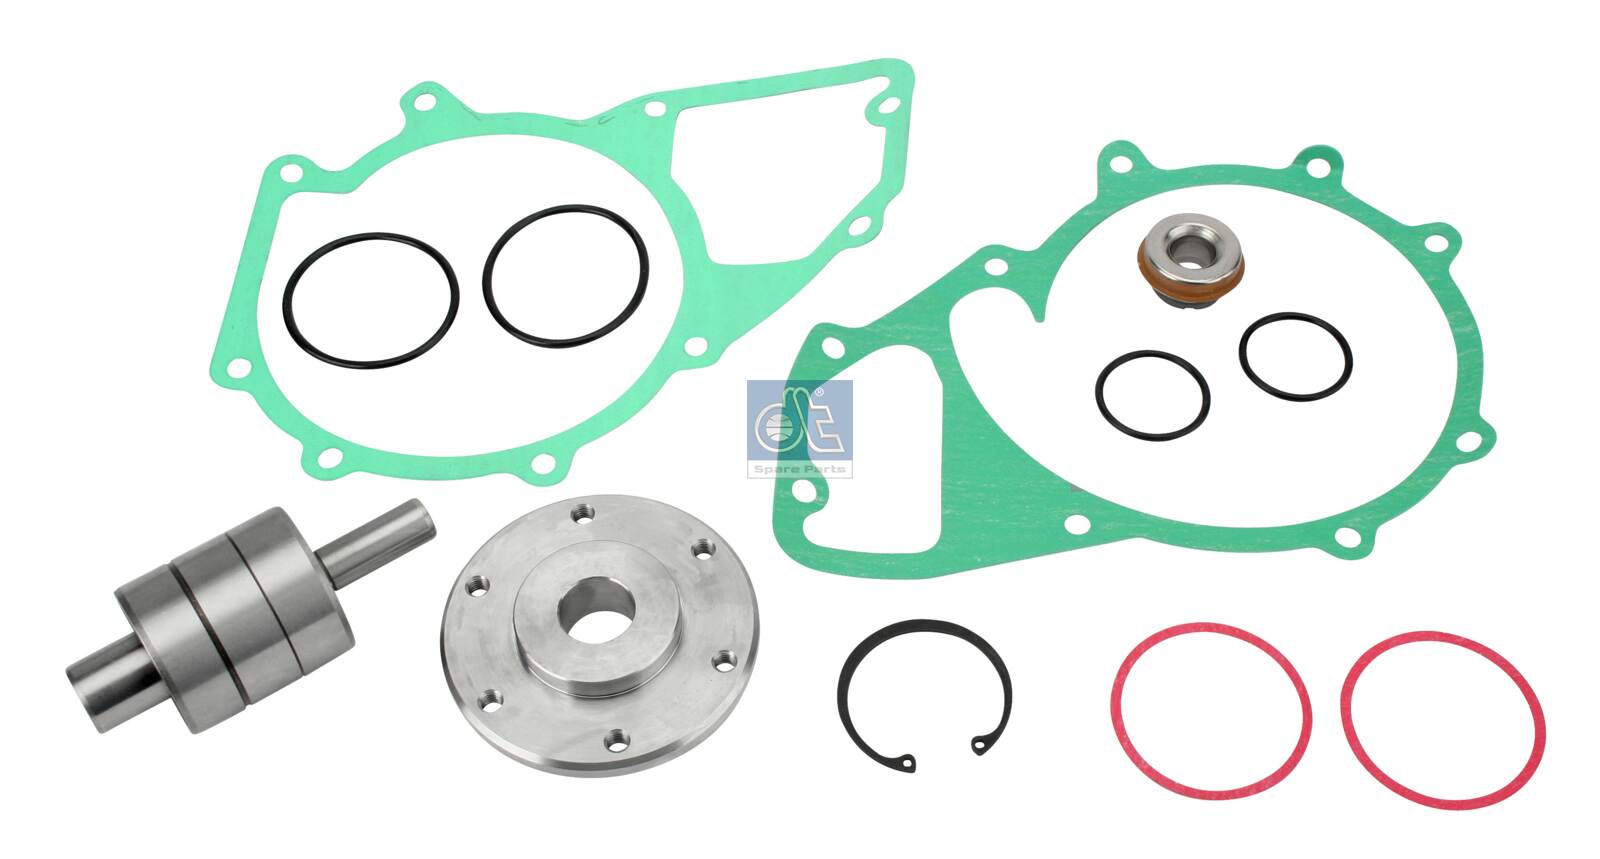 3.90600, Repair Kit, water pump, DT Spare Parts, 51.06599.6010, 51.06599.6011, 51.06599.6012, 51.06599.6033, 51.06599.6035, 01205001, 01.43.233, 022010250000, 030.930-00A, 03520, 08.120.0915.1S, 12-335996033, 12R380065, 20160225009, 225747, 55582043, 86686, 9966, 020.719, 05.19.016, 06659, 0915.1S, 20.1602.25009, 4032000260, 4032006901, 51065200060, 51065200068, 51065200082, 51065996010, 51065996011